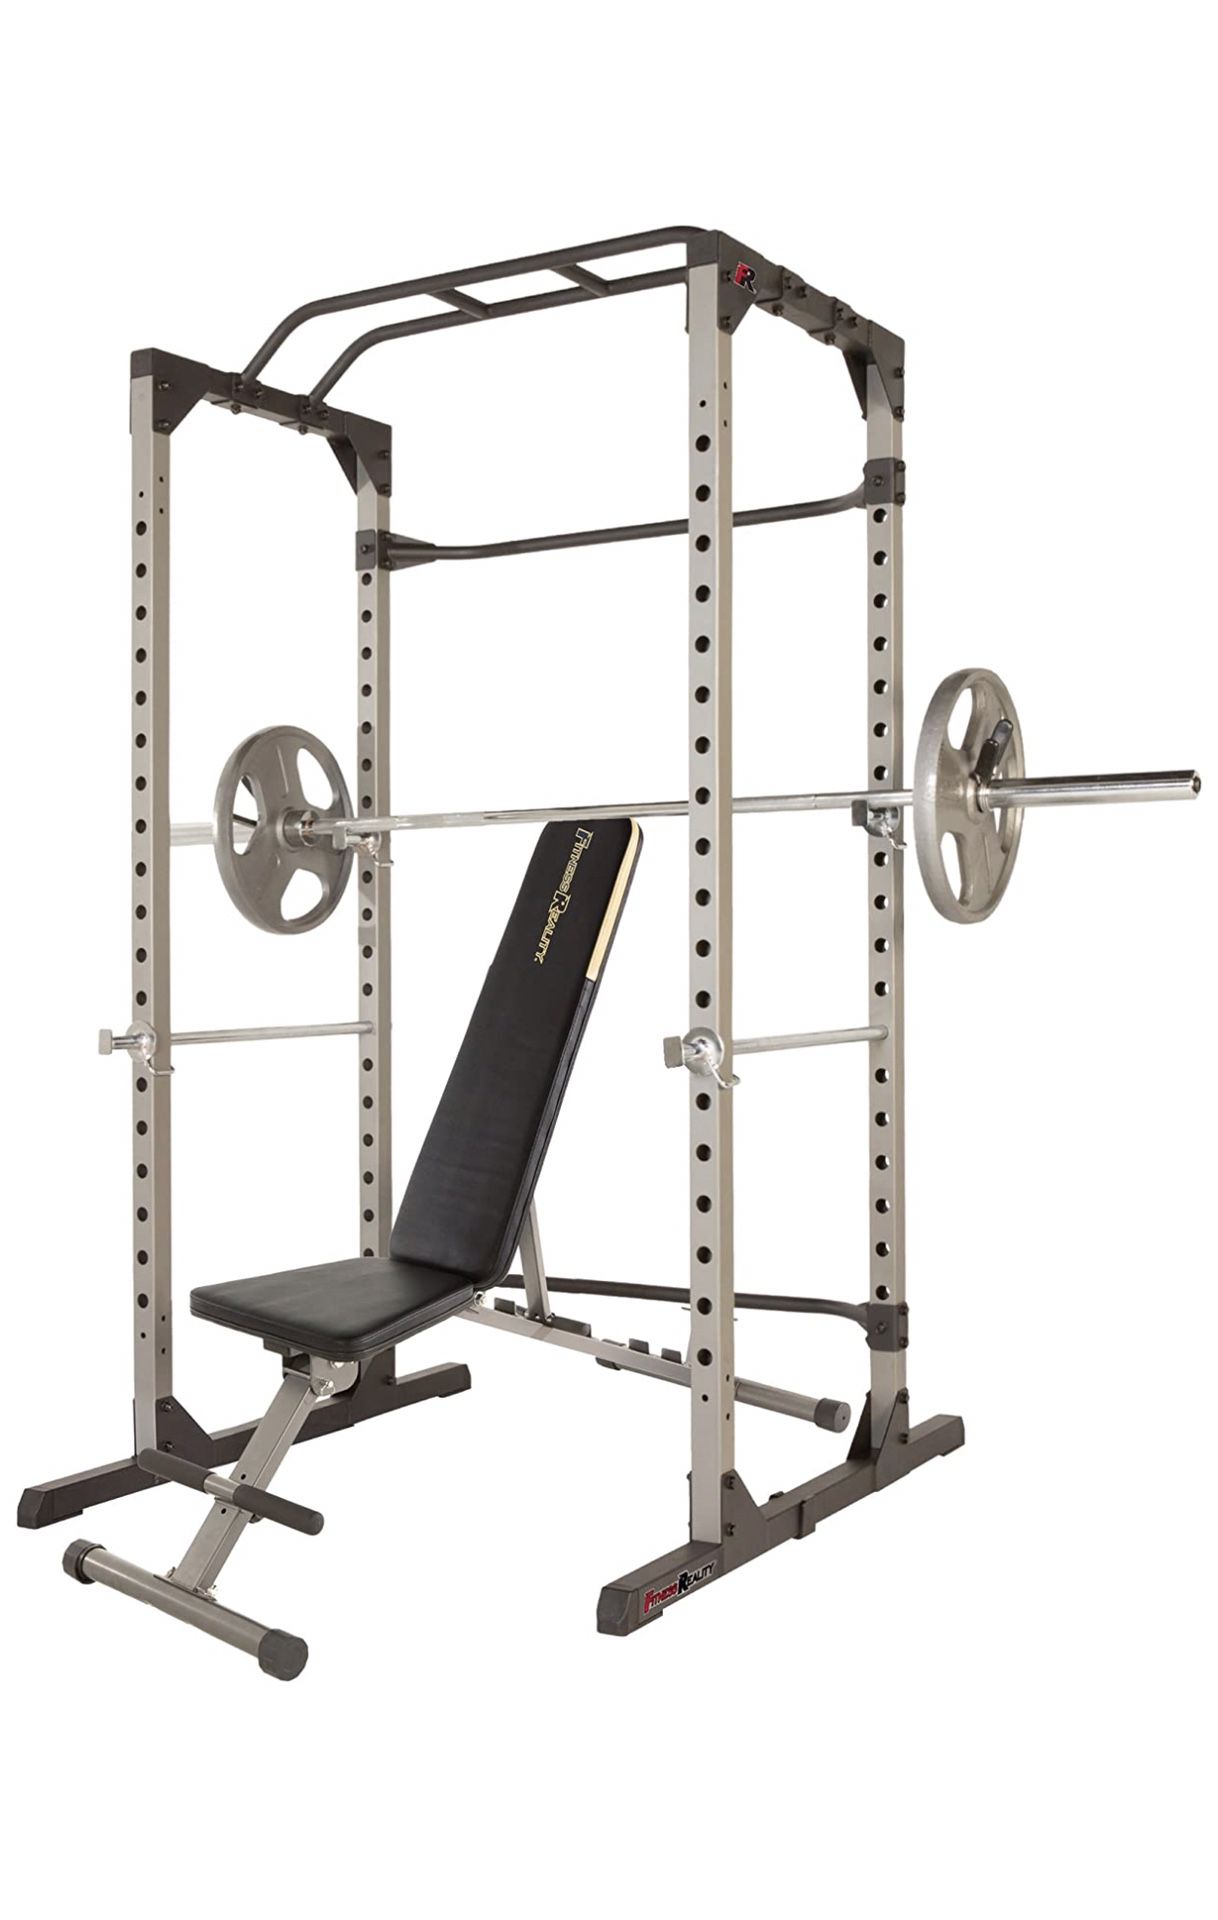 Olympic Power Cage Squat Rack & Adjustable Bench COMBO - 800 lb weight Capacity Reality Fitness